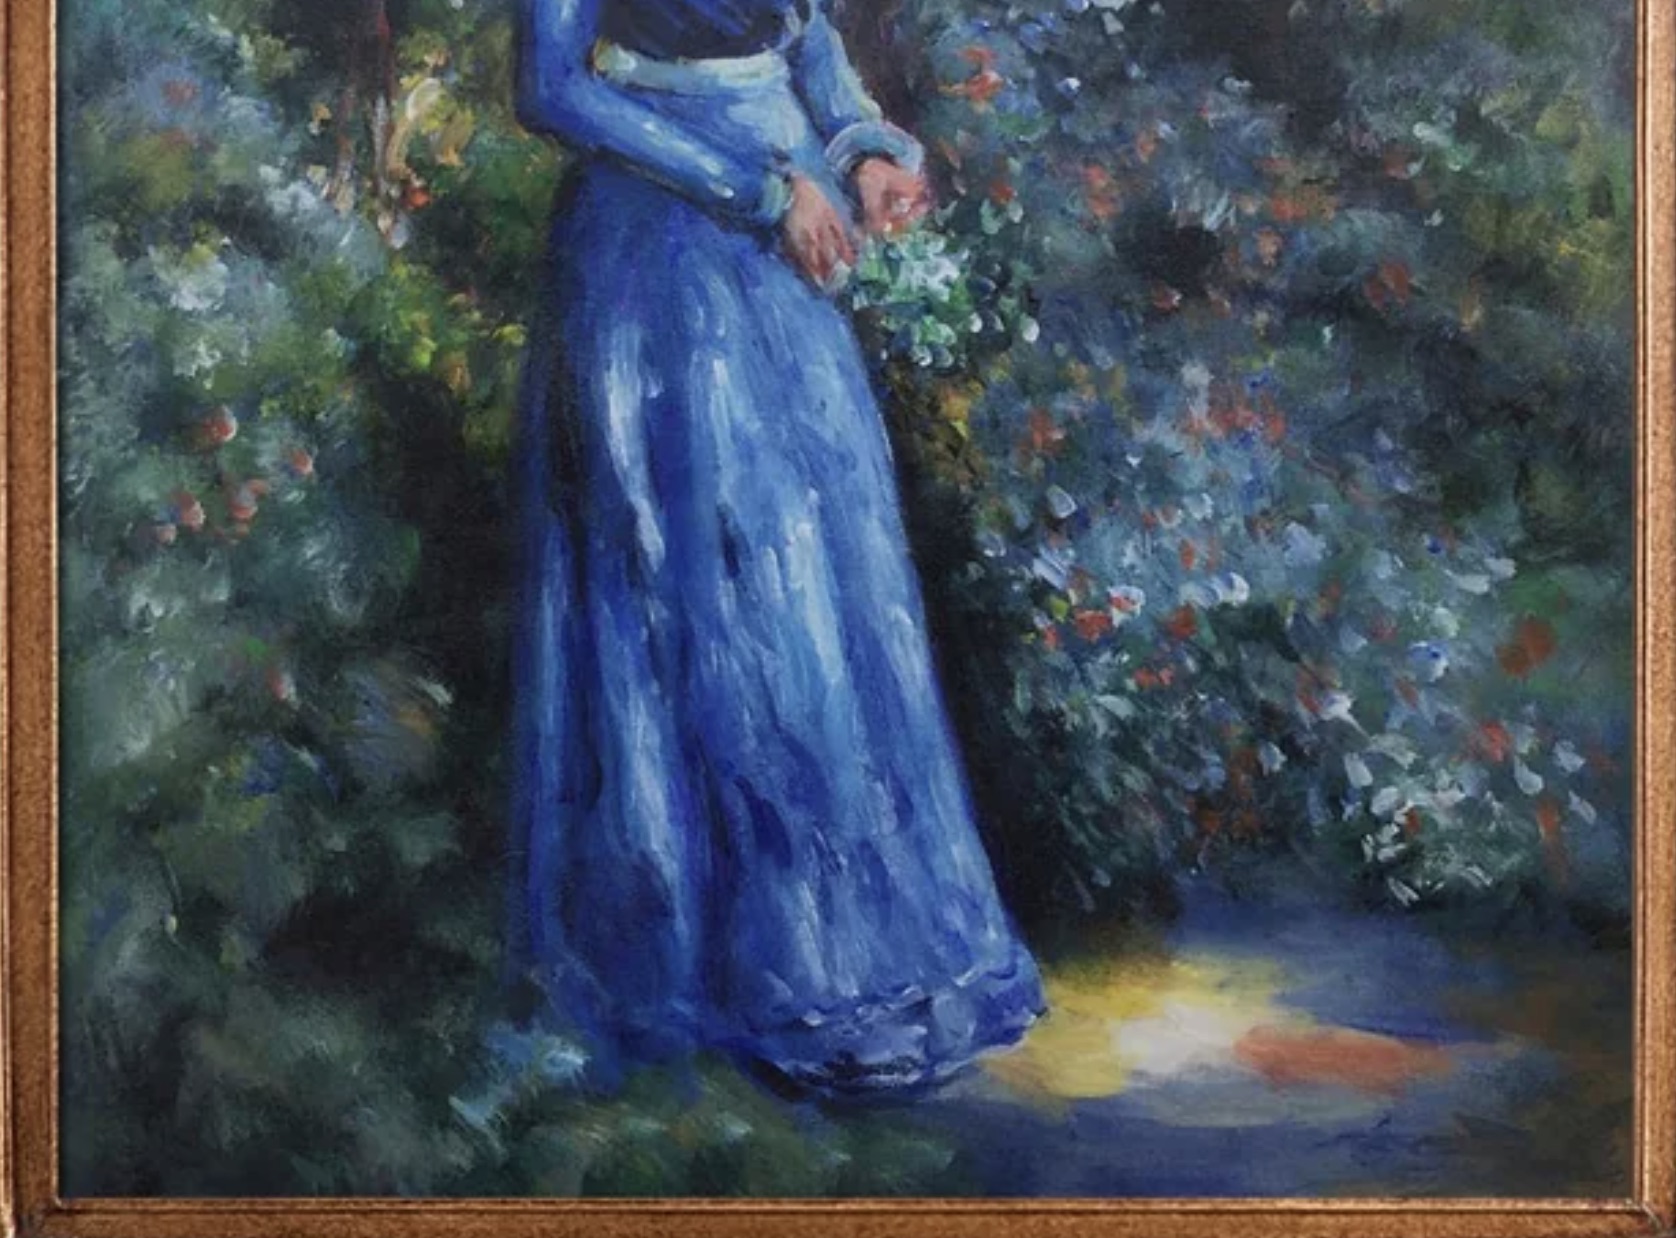 Pierre Auguste Renoir "Woman in a Blue Dress, Standing in the Garden of St. Cloud" Oil Painting, - Image 4 of 4